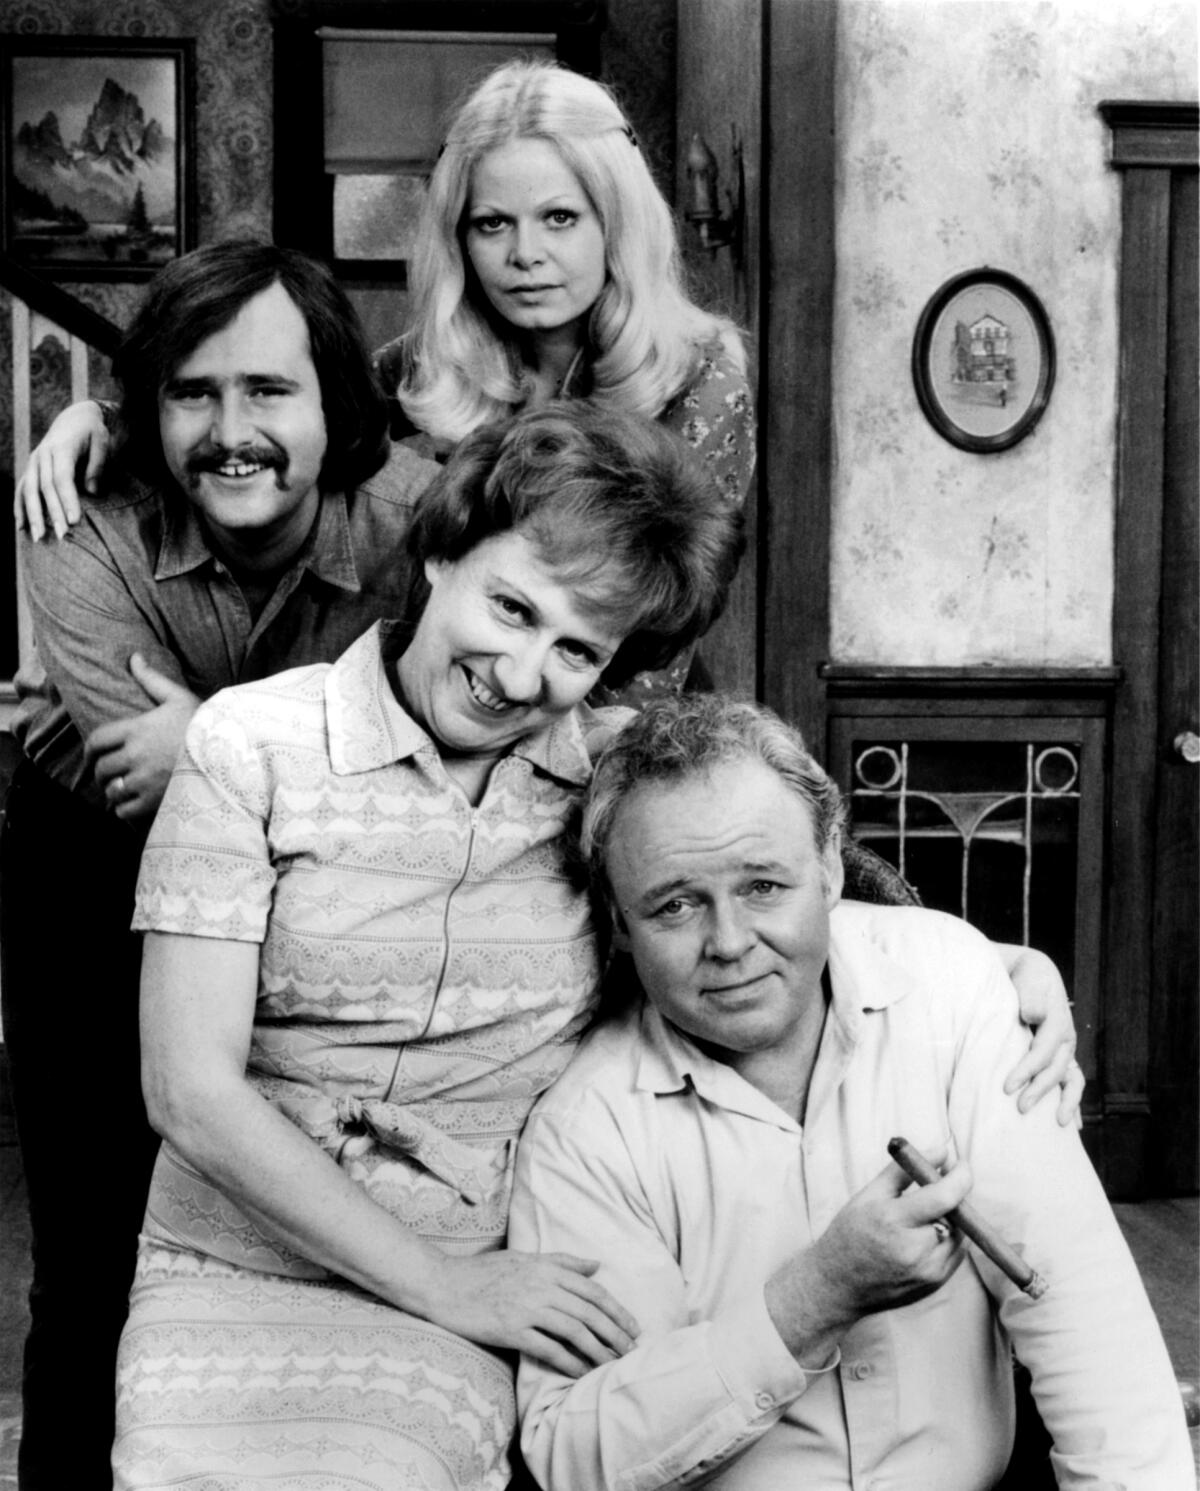 The four main characters from the '70s series "All in the Family" pose for a photo in Archie Bunker's living room.